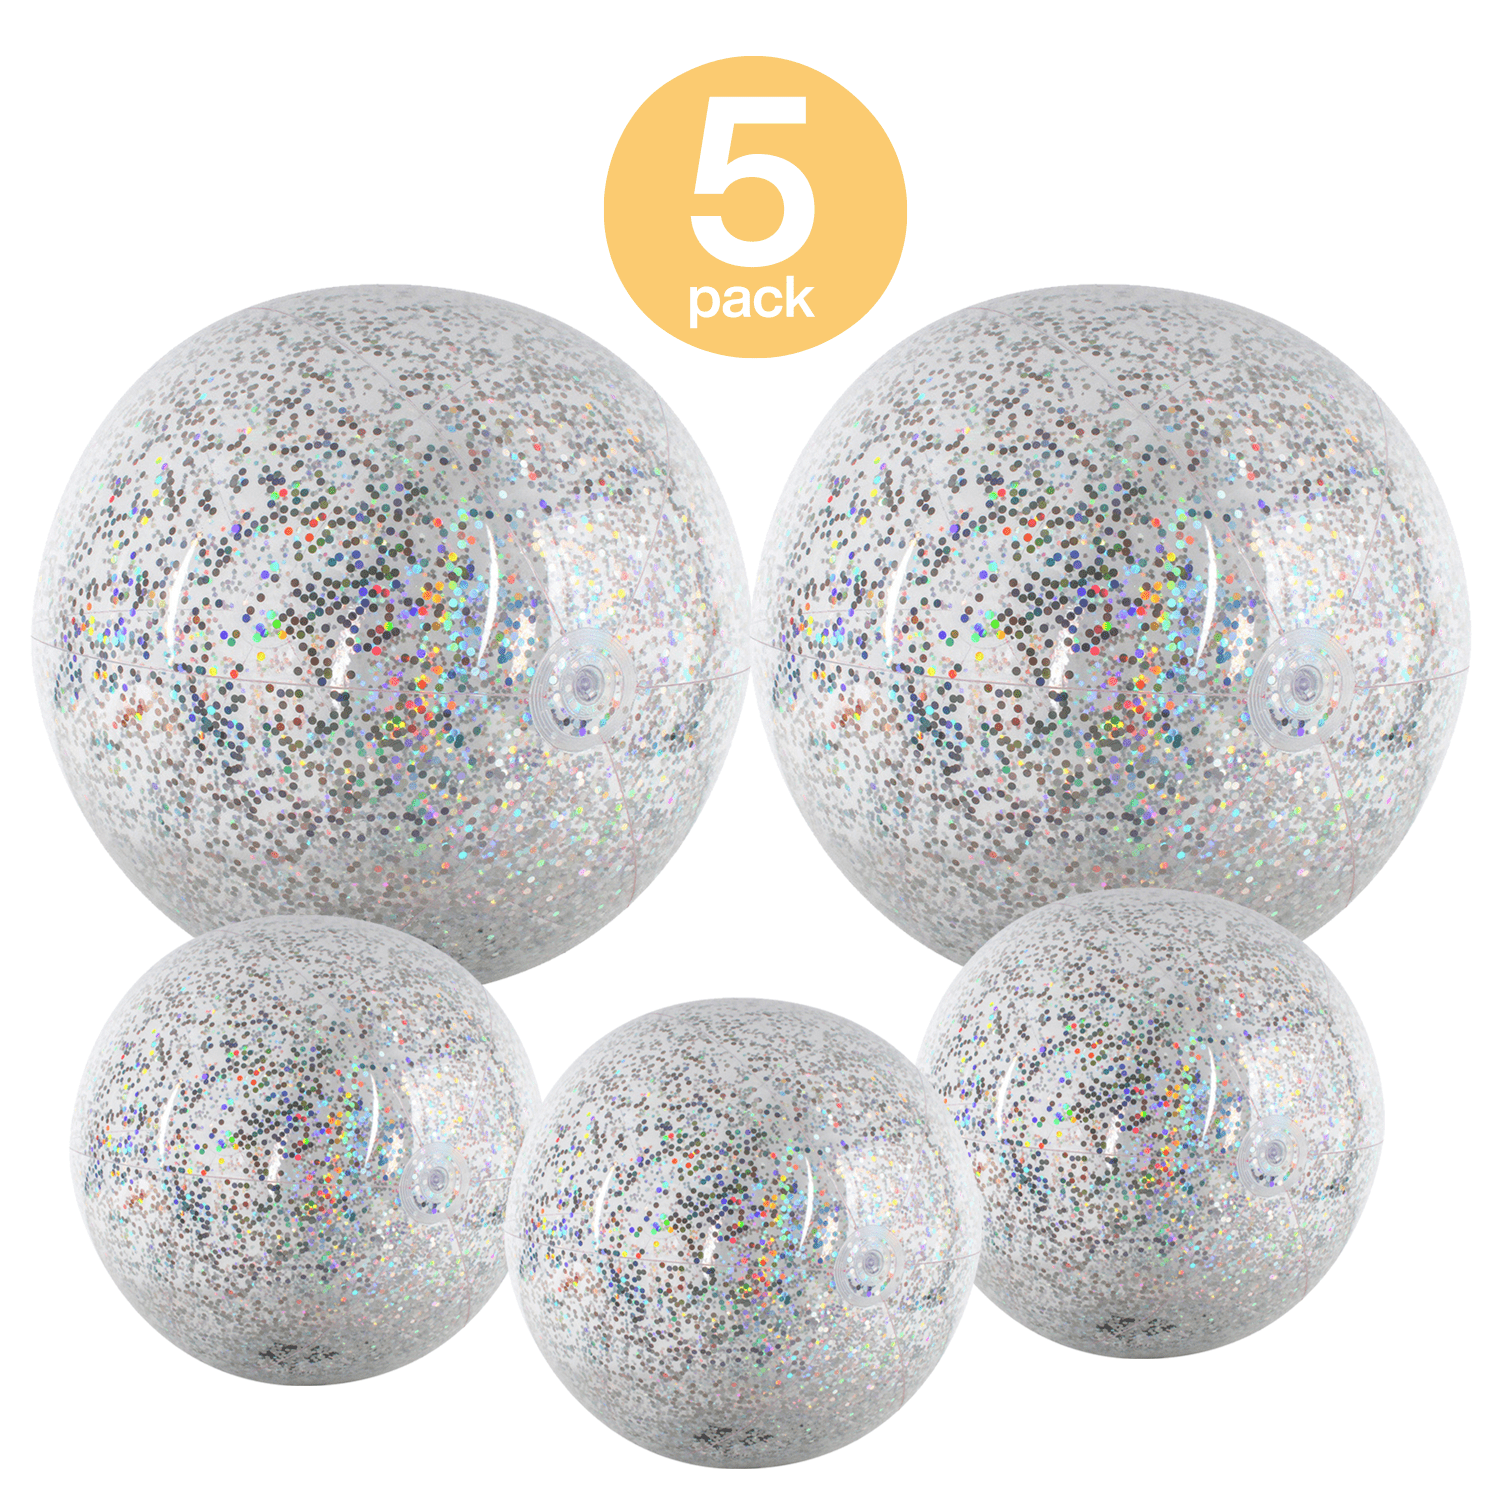 16 inch Sequin Beach Balls Confetti Glitter Clear Beach Ball Swimming Pool Toys Water Game Indoor Outdoor Birthday Summer Party Favors for Kids Inflatable Beach Ball 